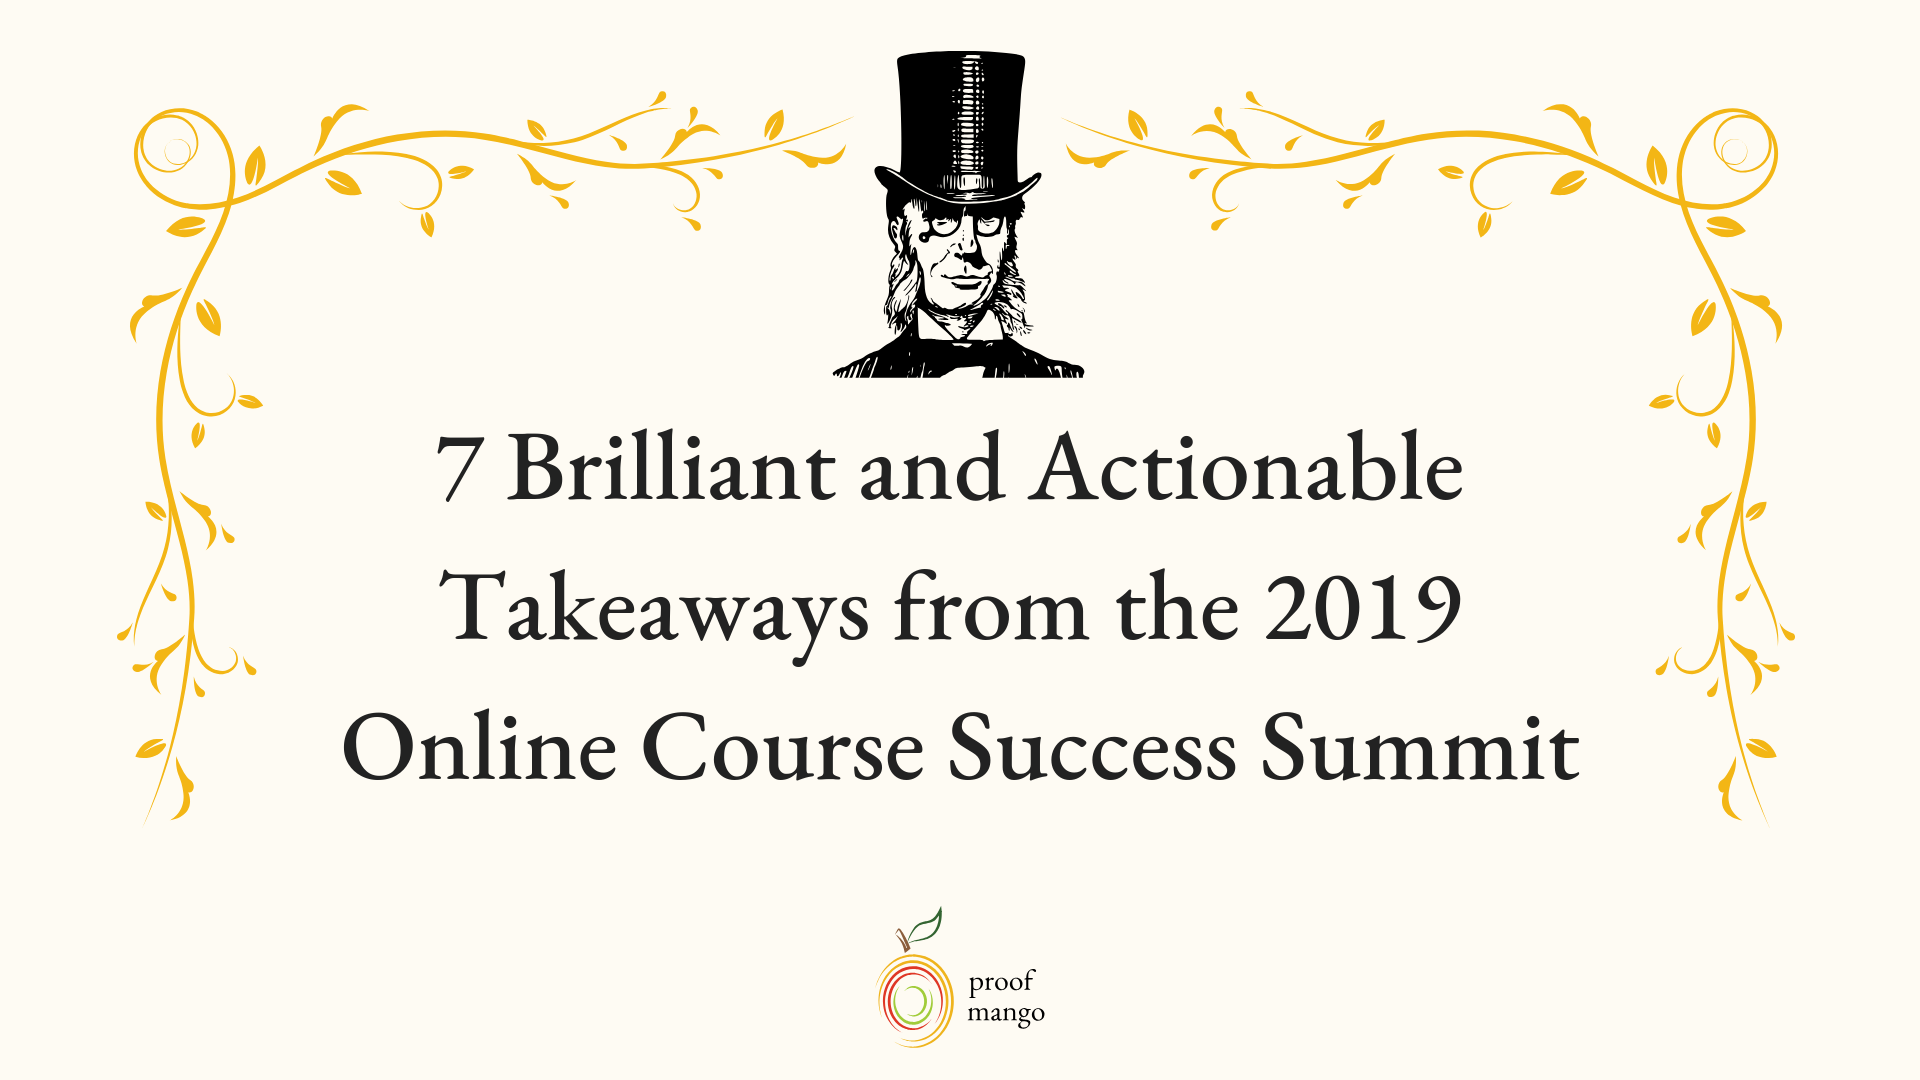 7 Brilliant and Actionable Takeaways from the 2019 Online Course Success Summit